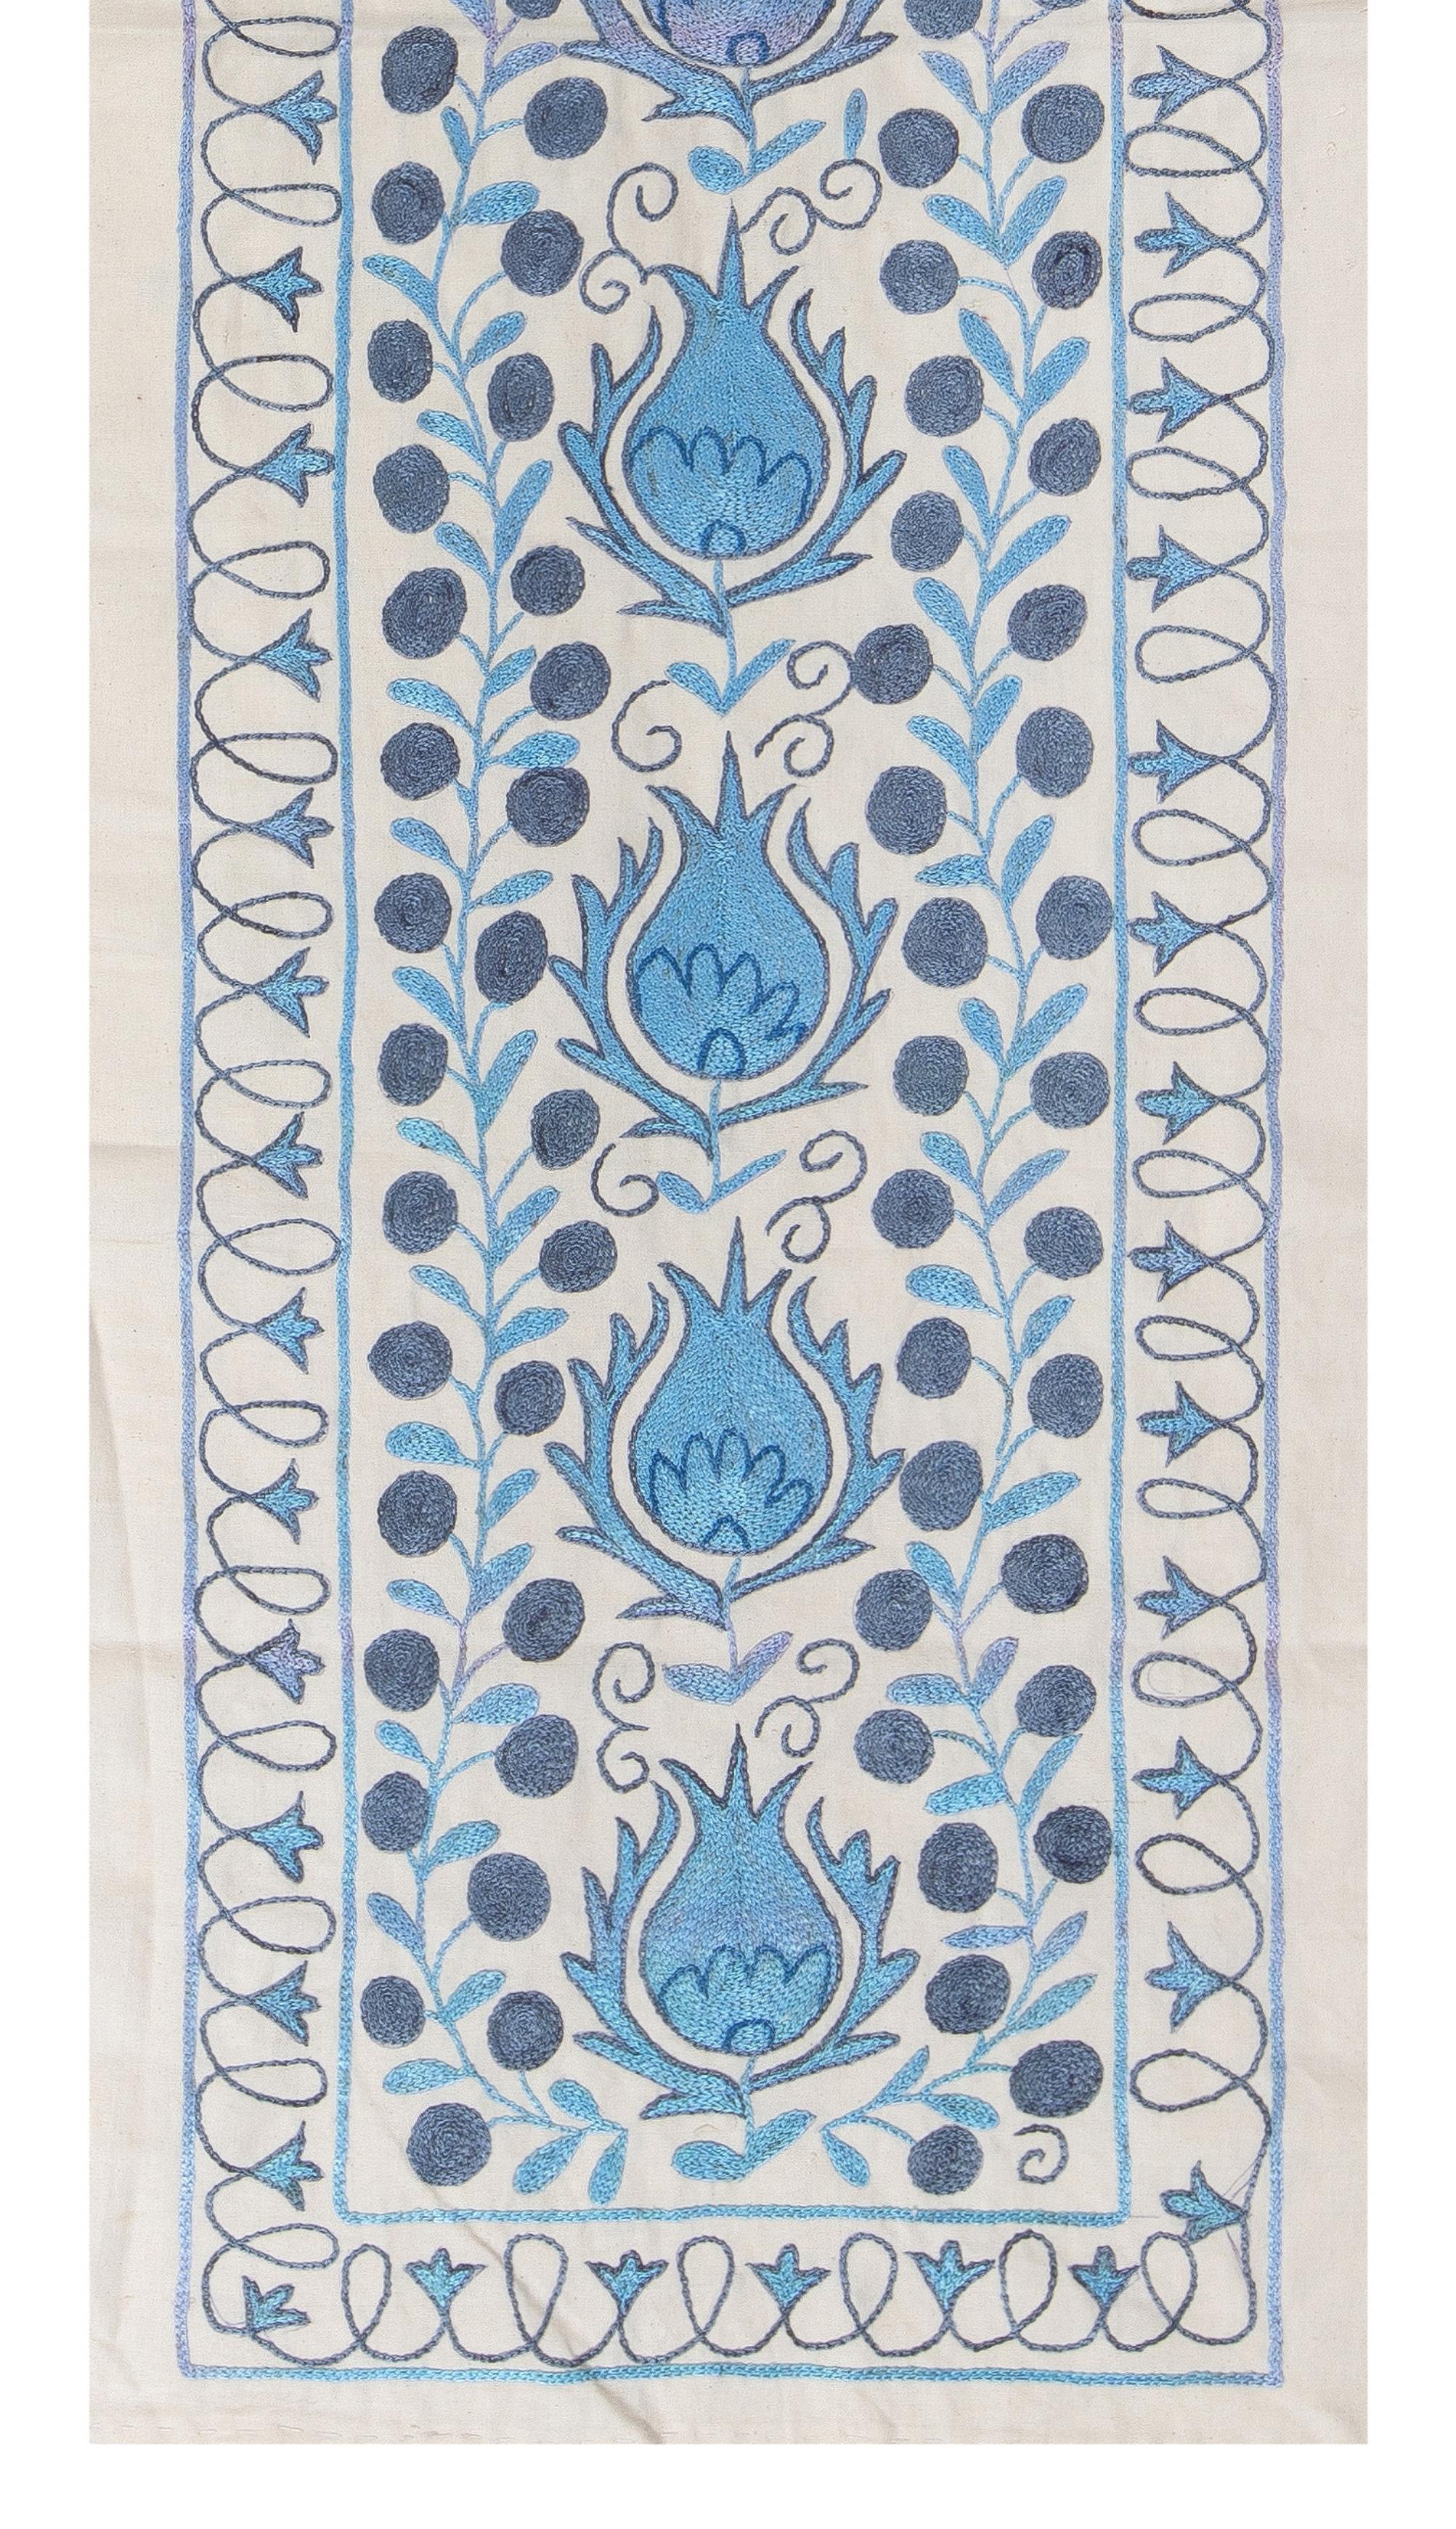 Uzbek 1.7x6.2 Ft Central Asian Suzani Textile. Embroidered Cotton & Silk Table Runner For Sale